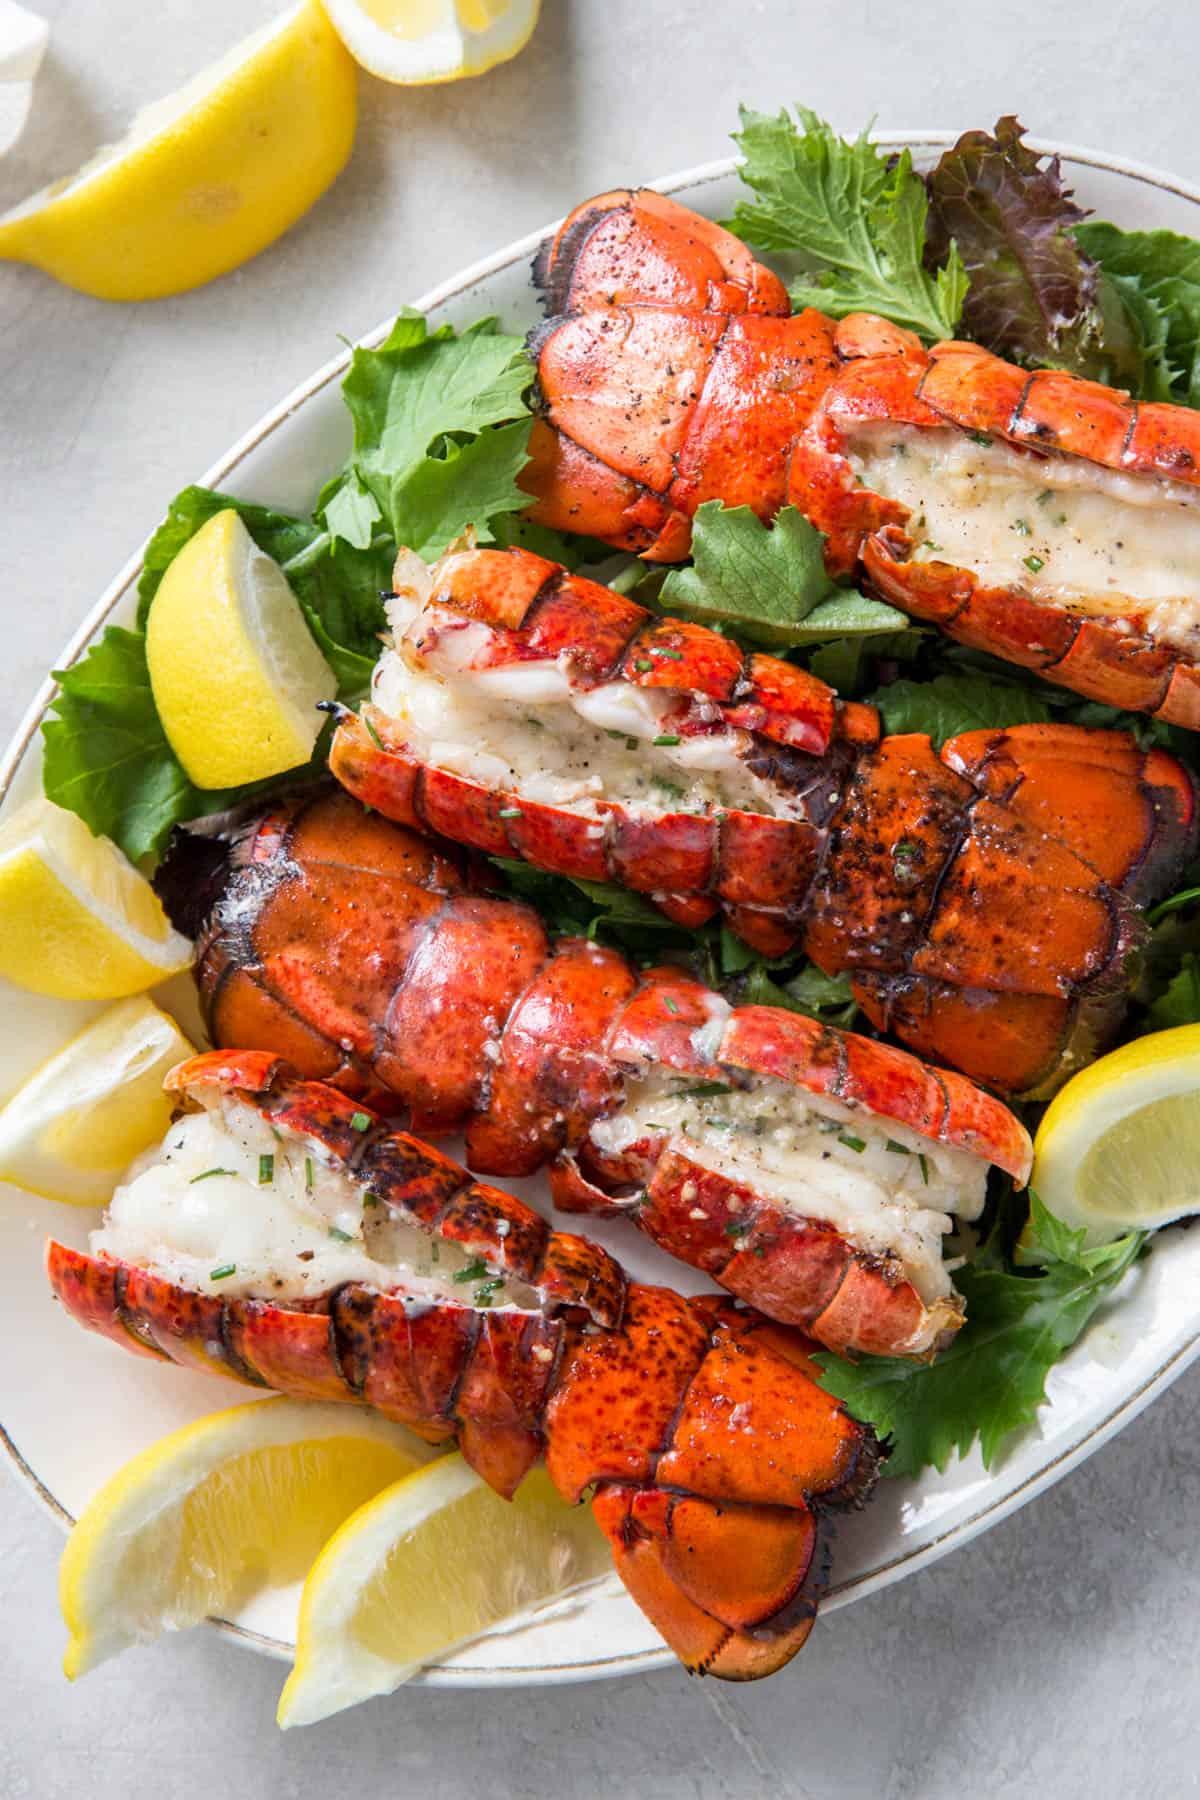 Four grilled lobster tails on a bed of lettuce on a plate for serving.